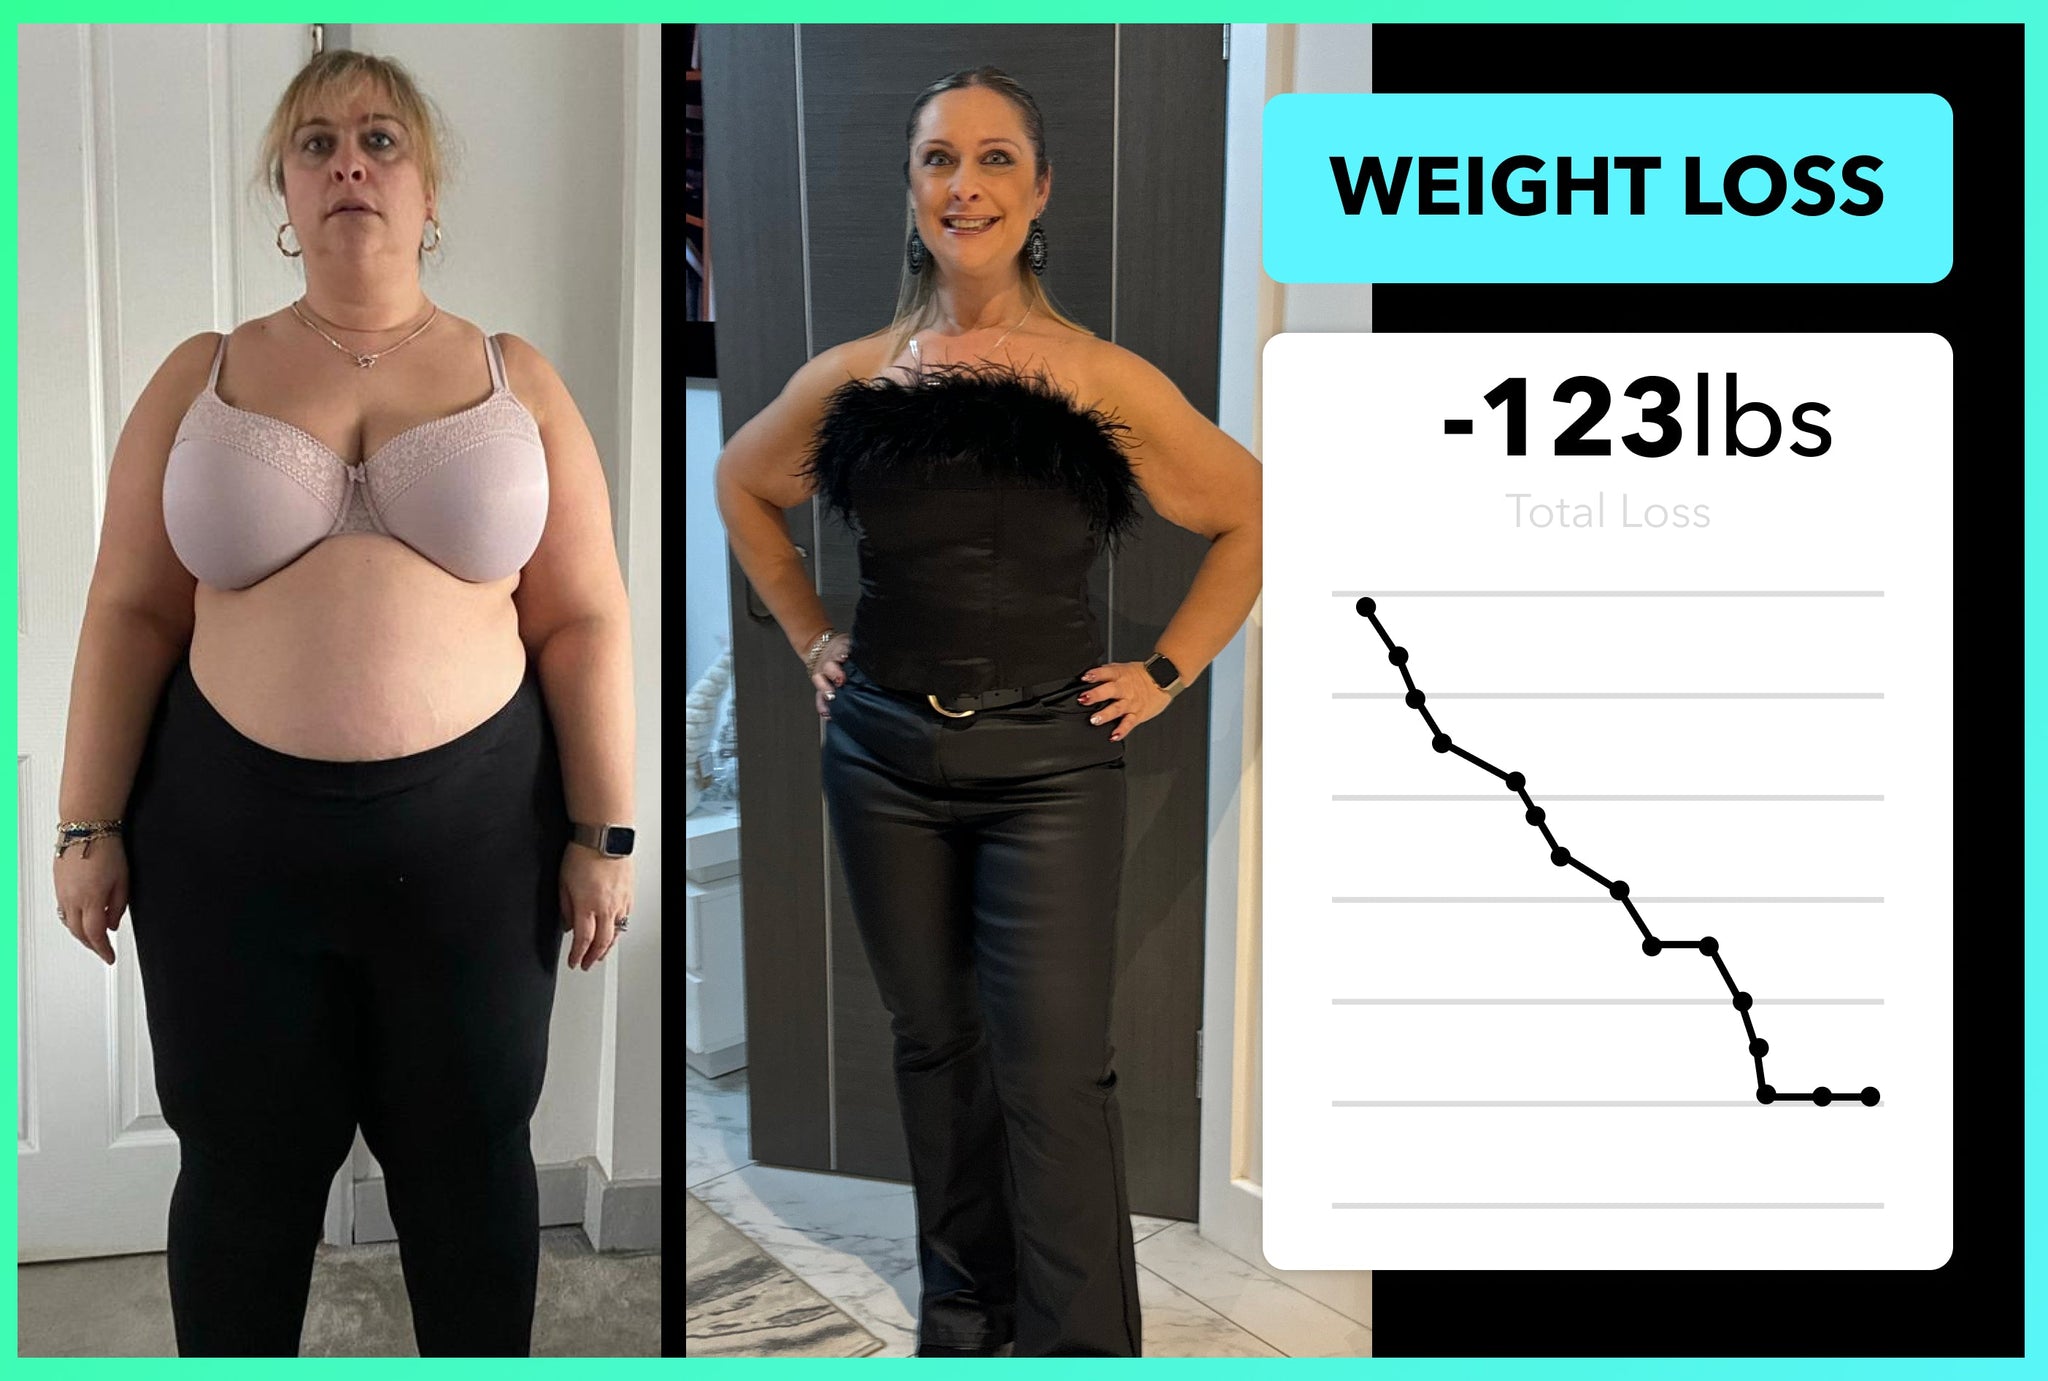 Discover how Lisa lost 123lbs in total!